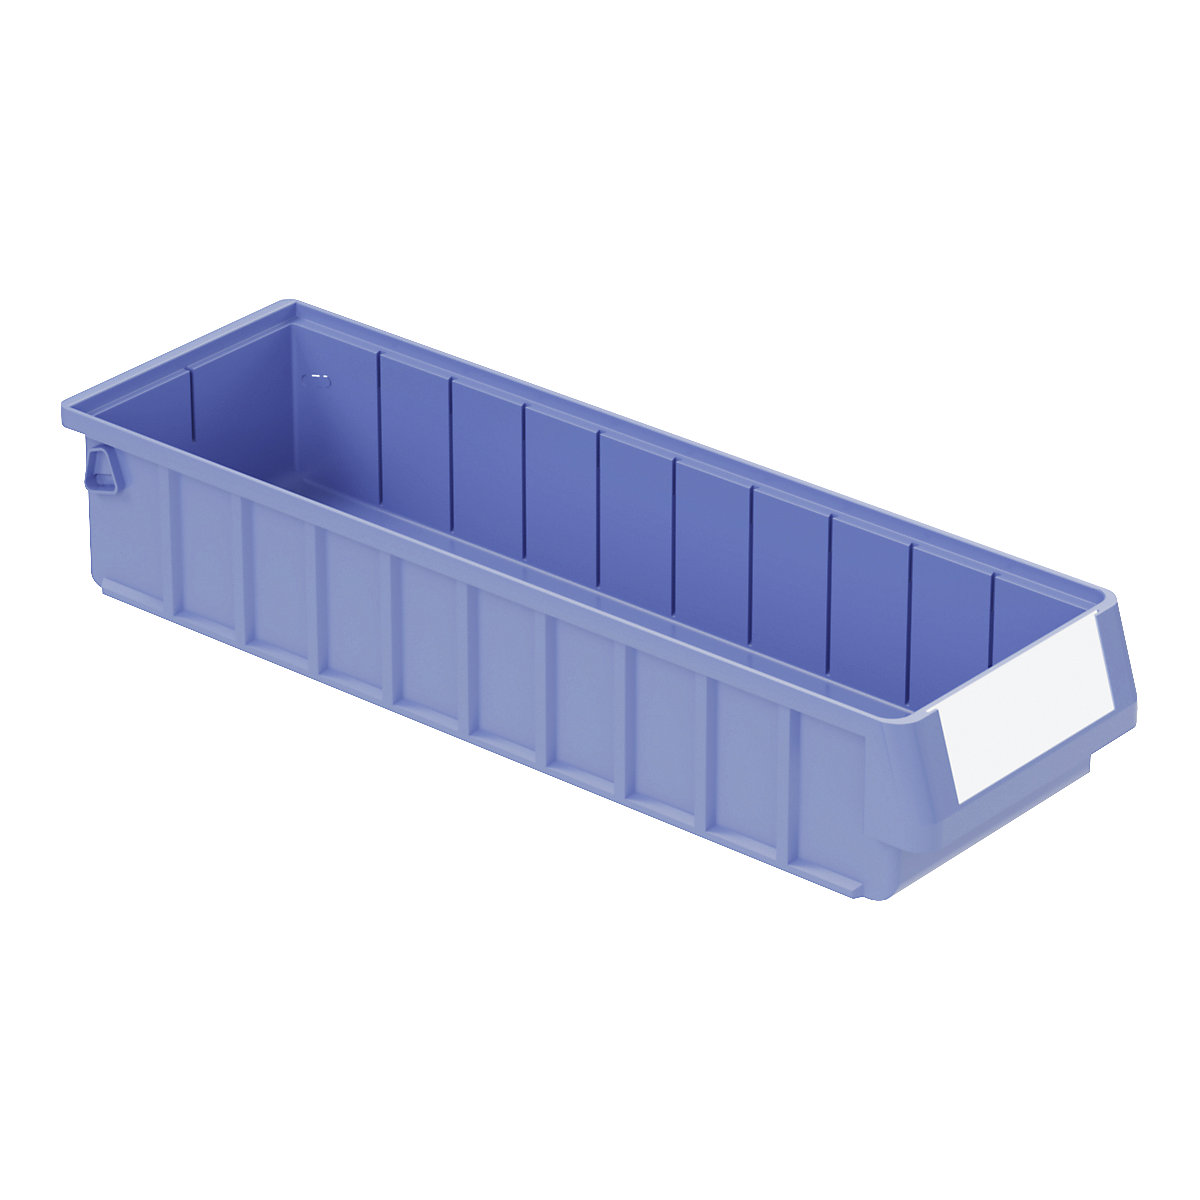 Shelf bin – BITO, made of PP, LxWxH 500 x 156 x 90 mm, pack of 12-6